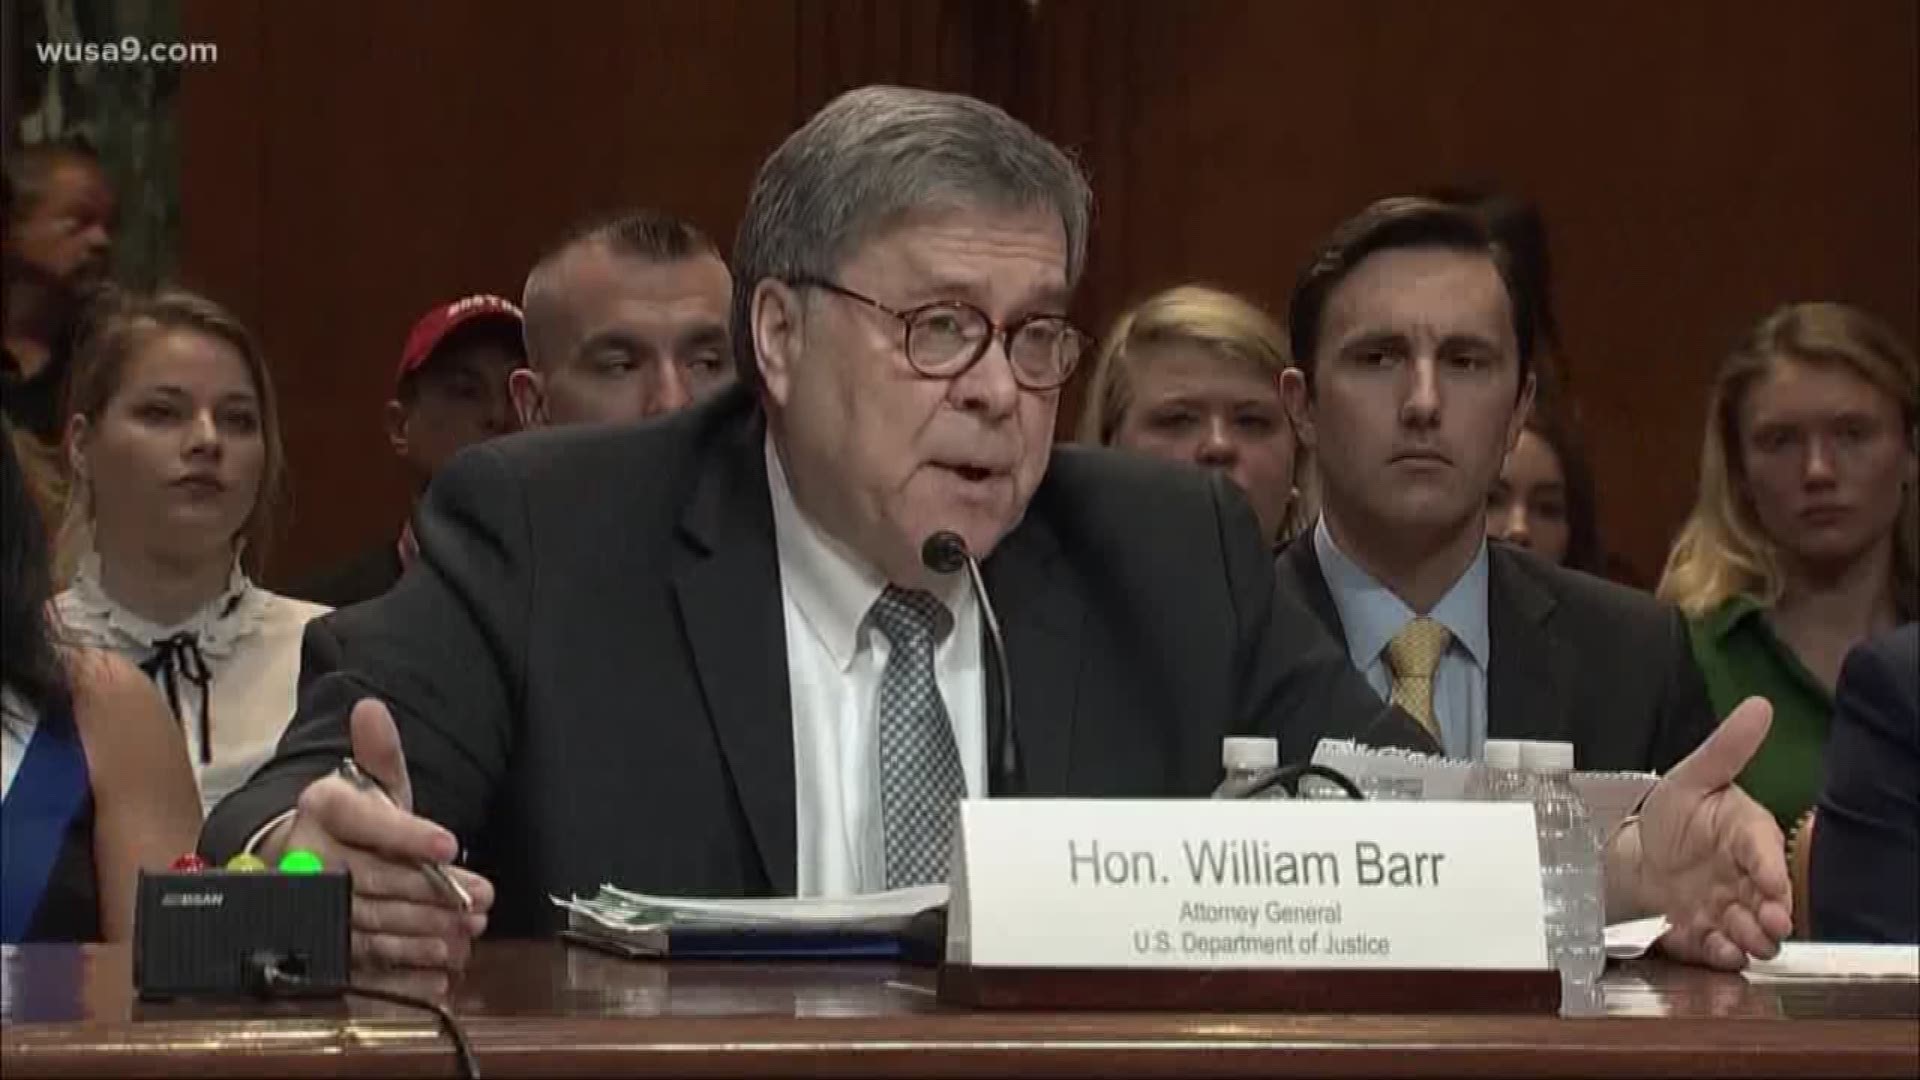 Attorney General William Barr returned to Capitol Hill for a second day of questioning on the Mueller report. In a stunning development, Barr said he believes "there was spying" on the Trump campaign during the 2016 election.